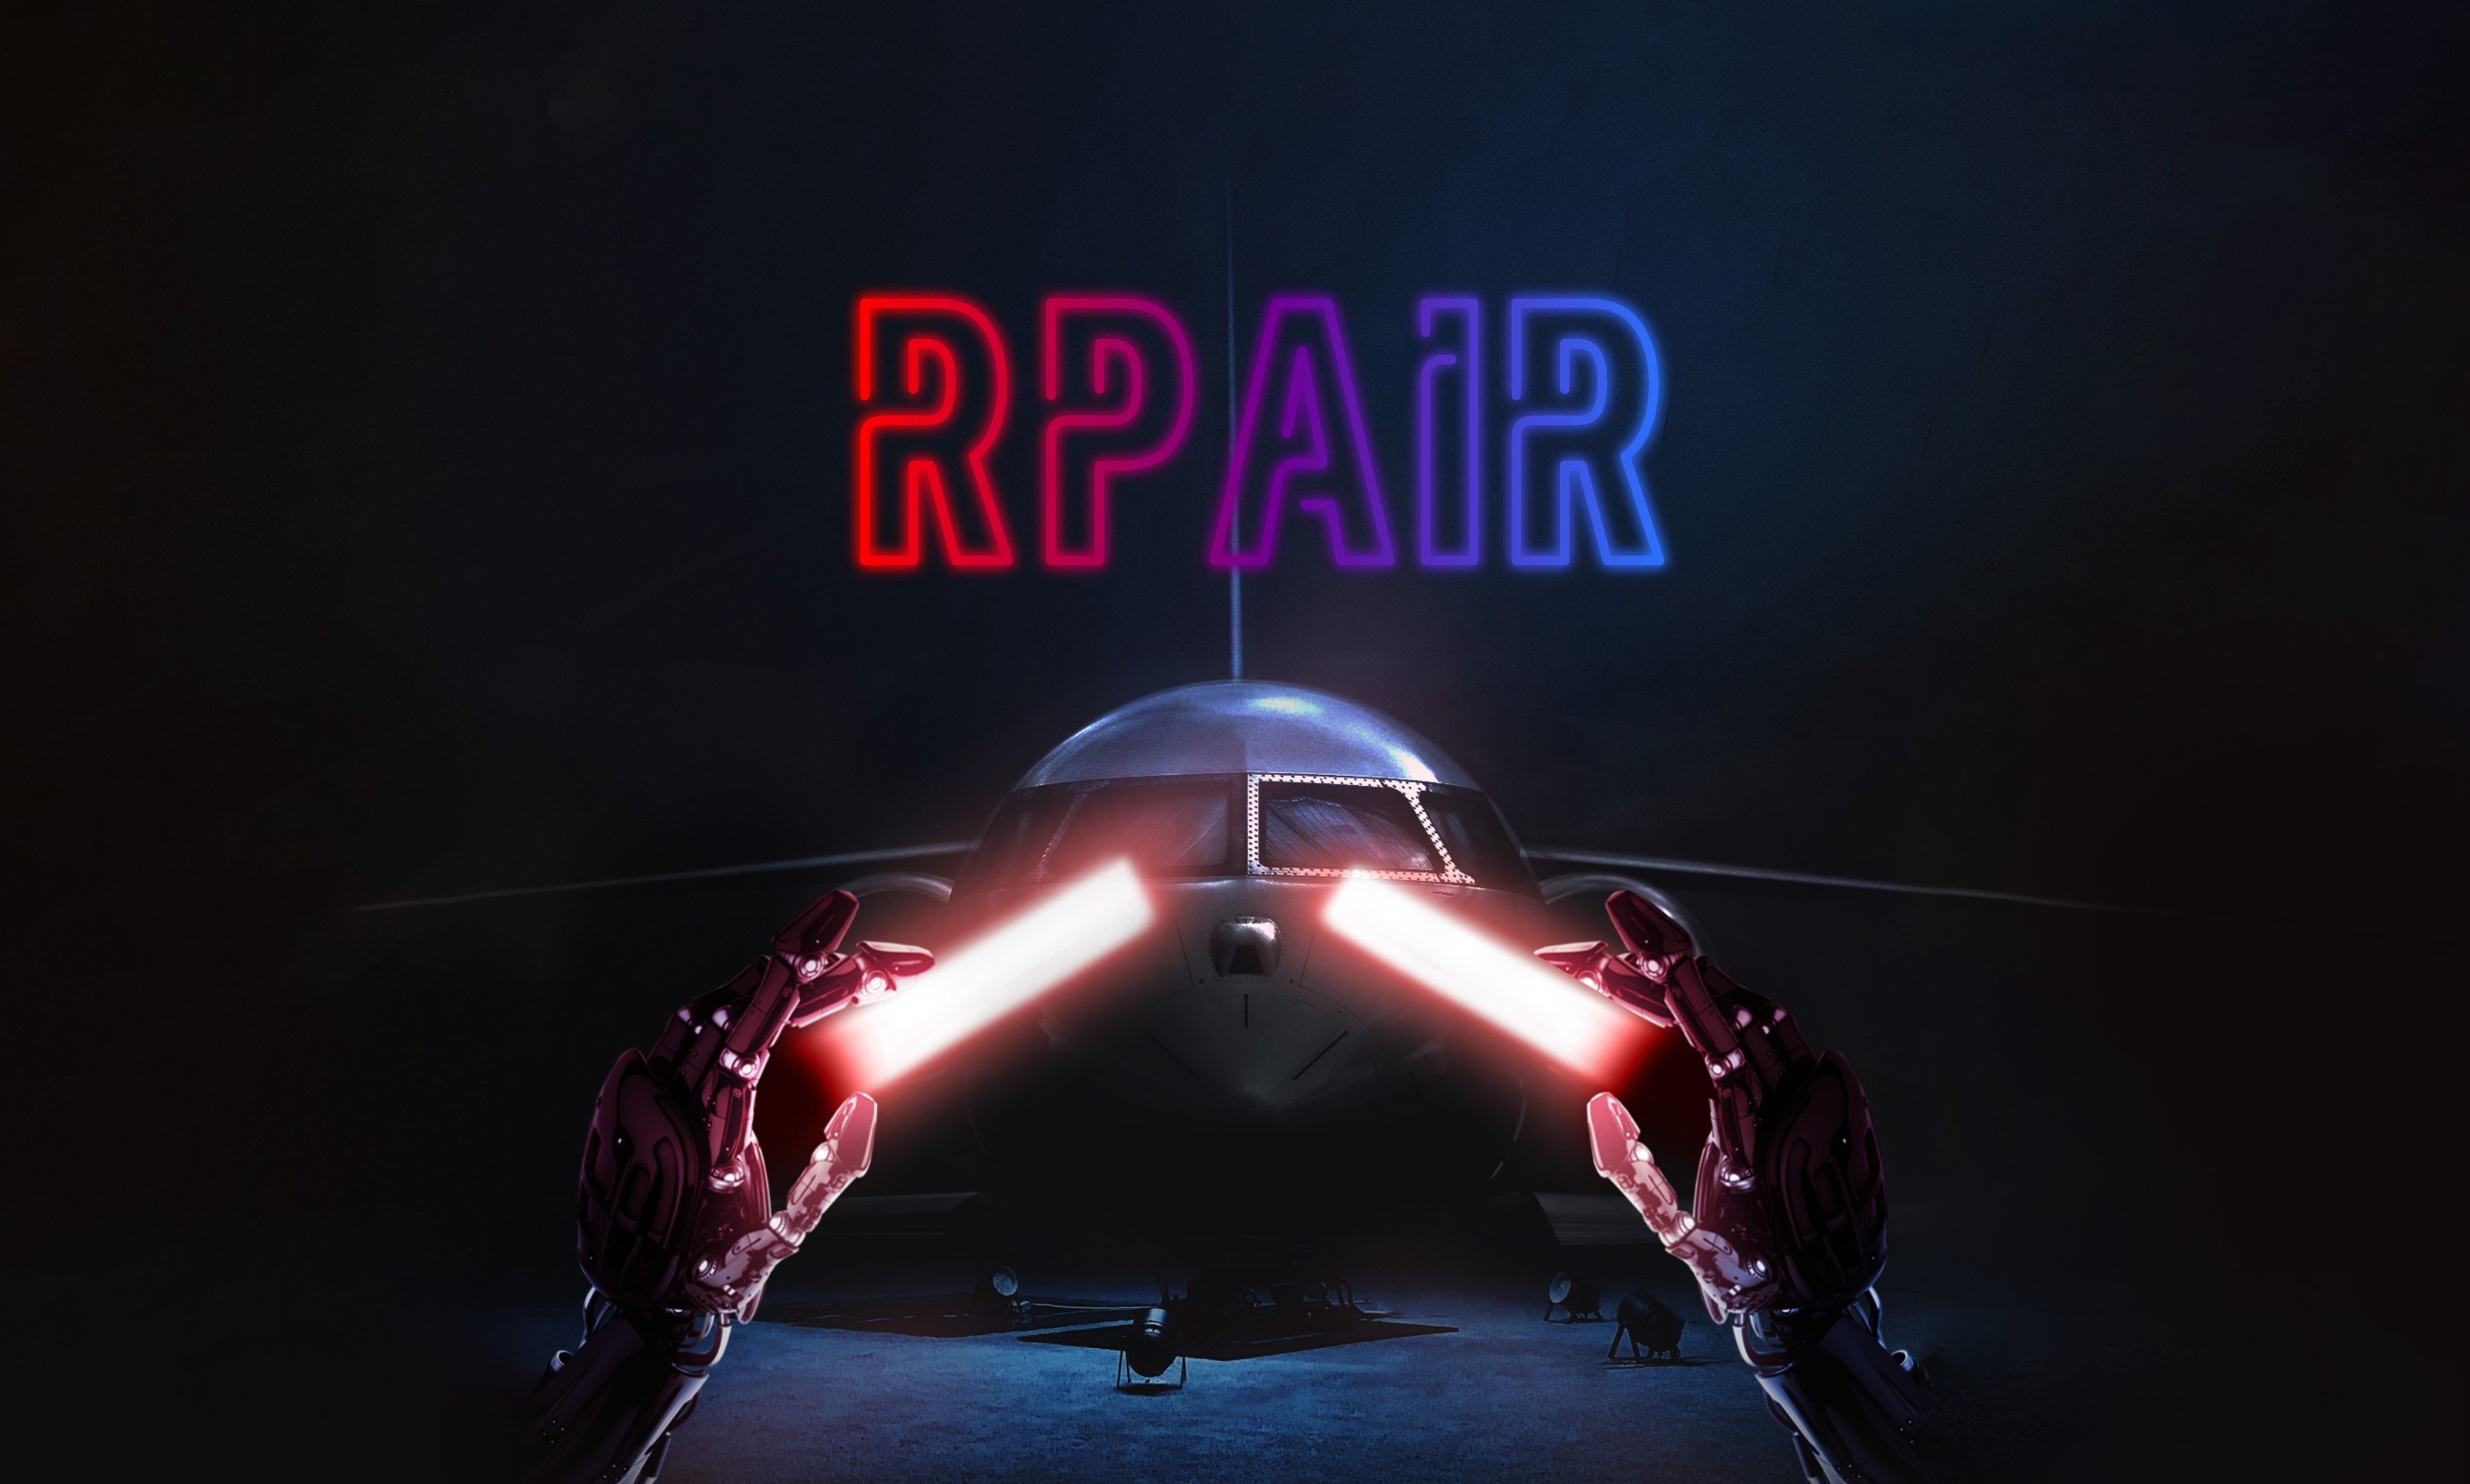   We proudly carried out the launch of our RPAiR program